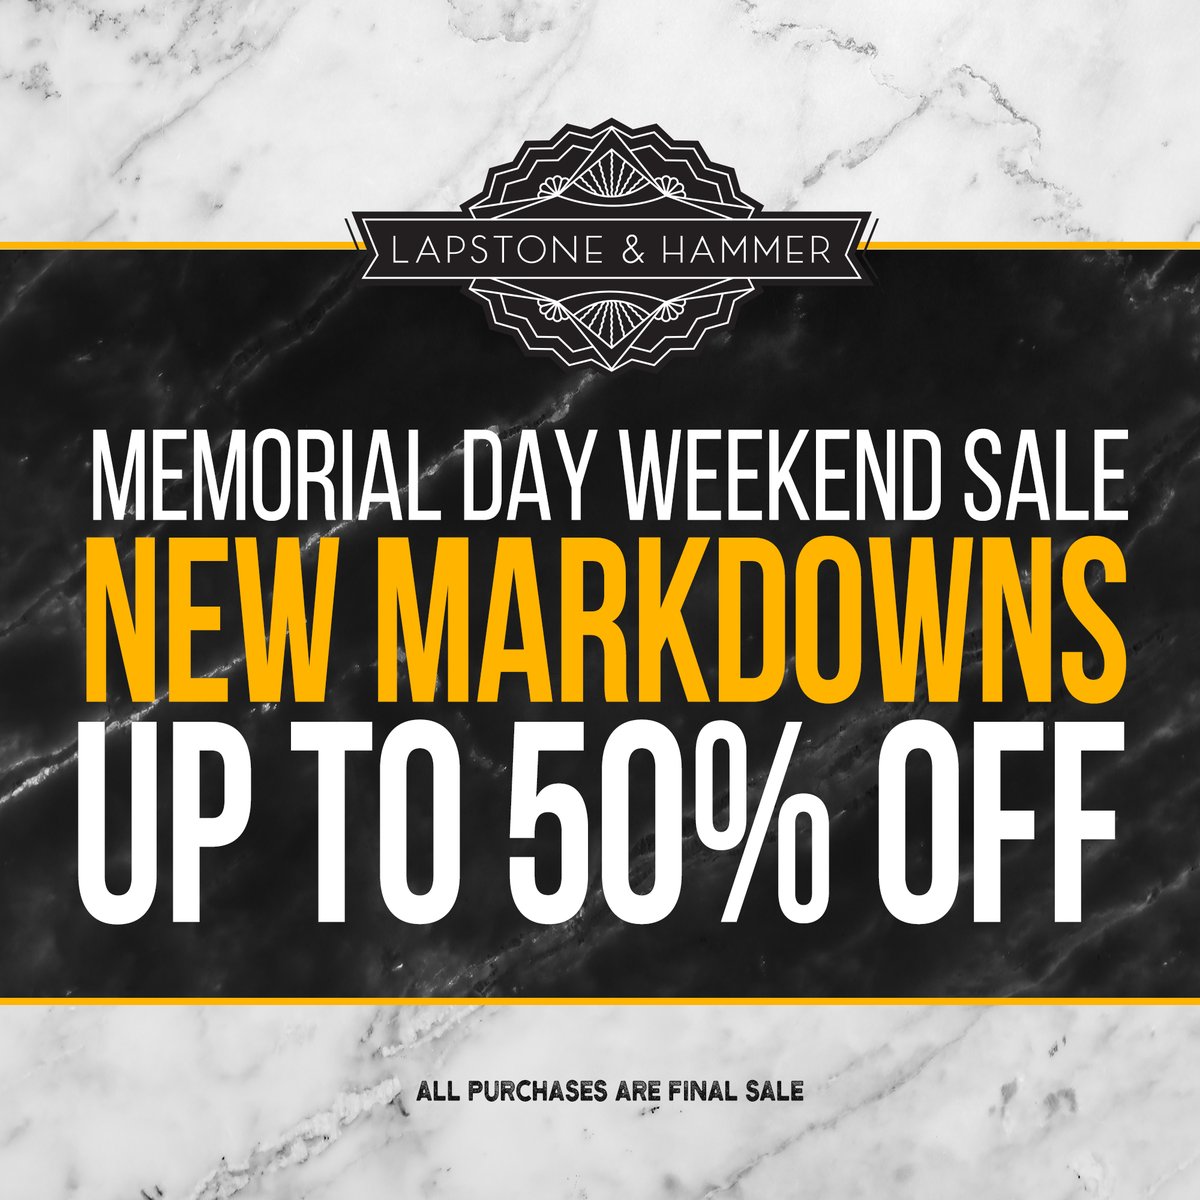 lapstone and hammer memorial day 2019 sale banner